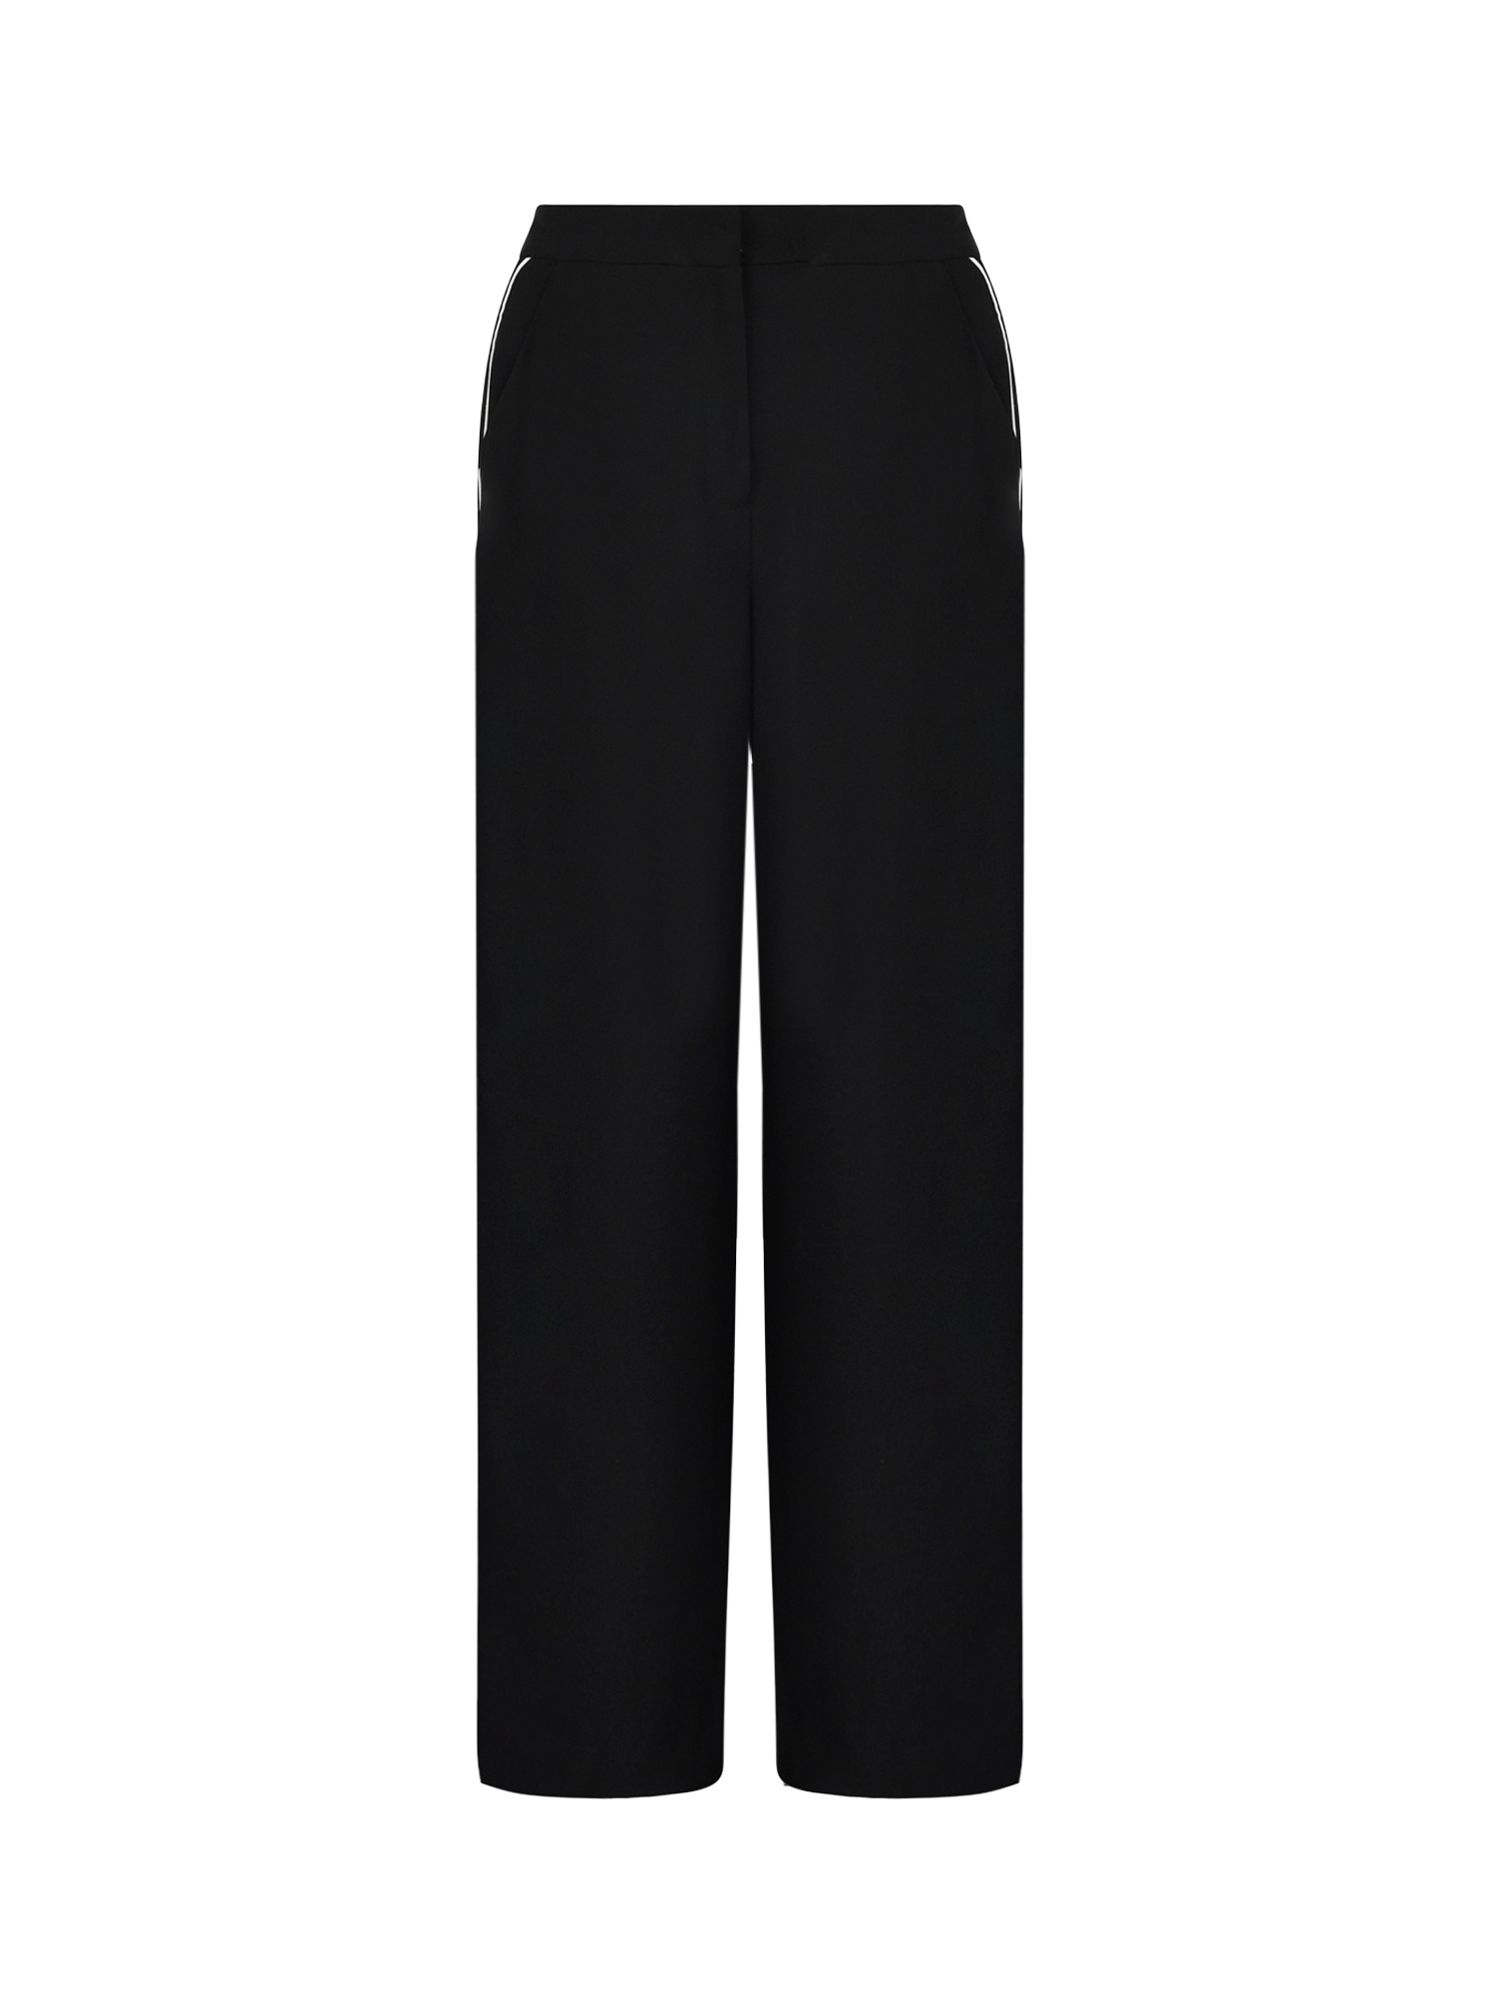 Ro&Zo Crepe Piping Detail Trousers, Black, 6